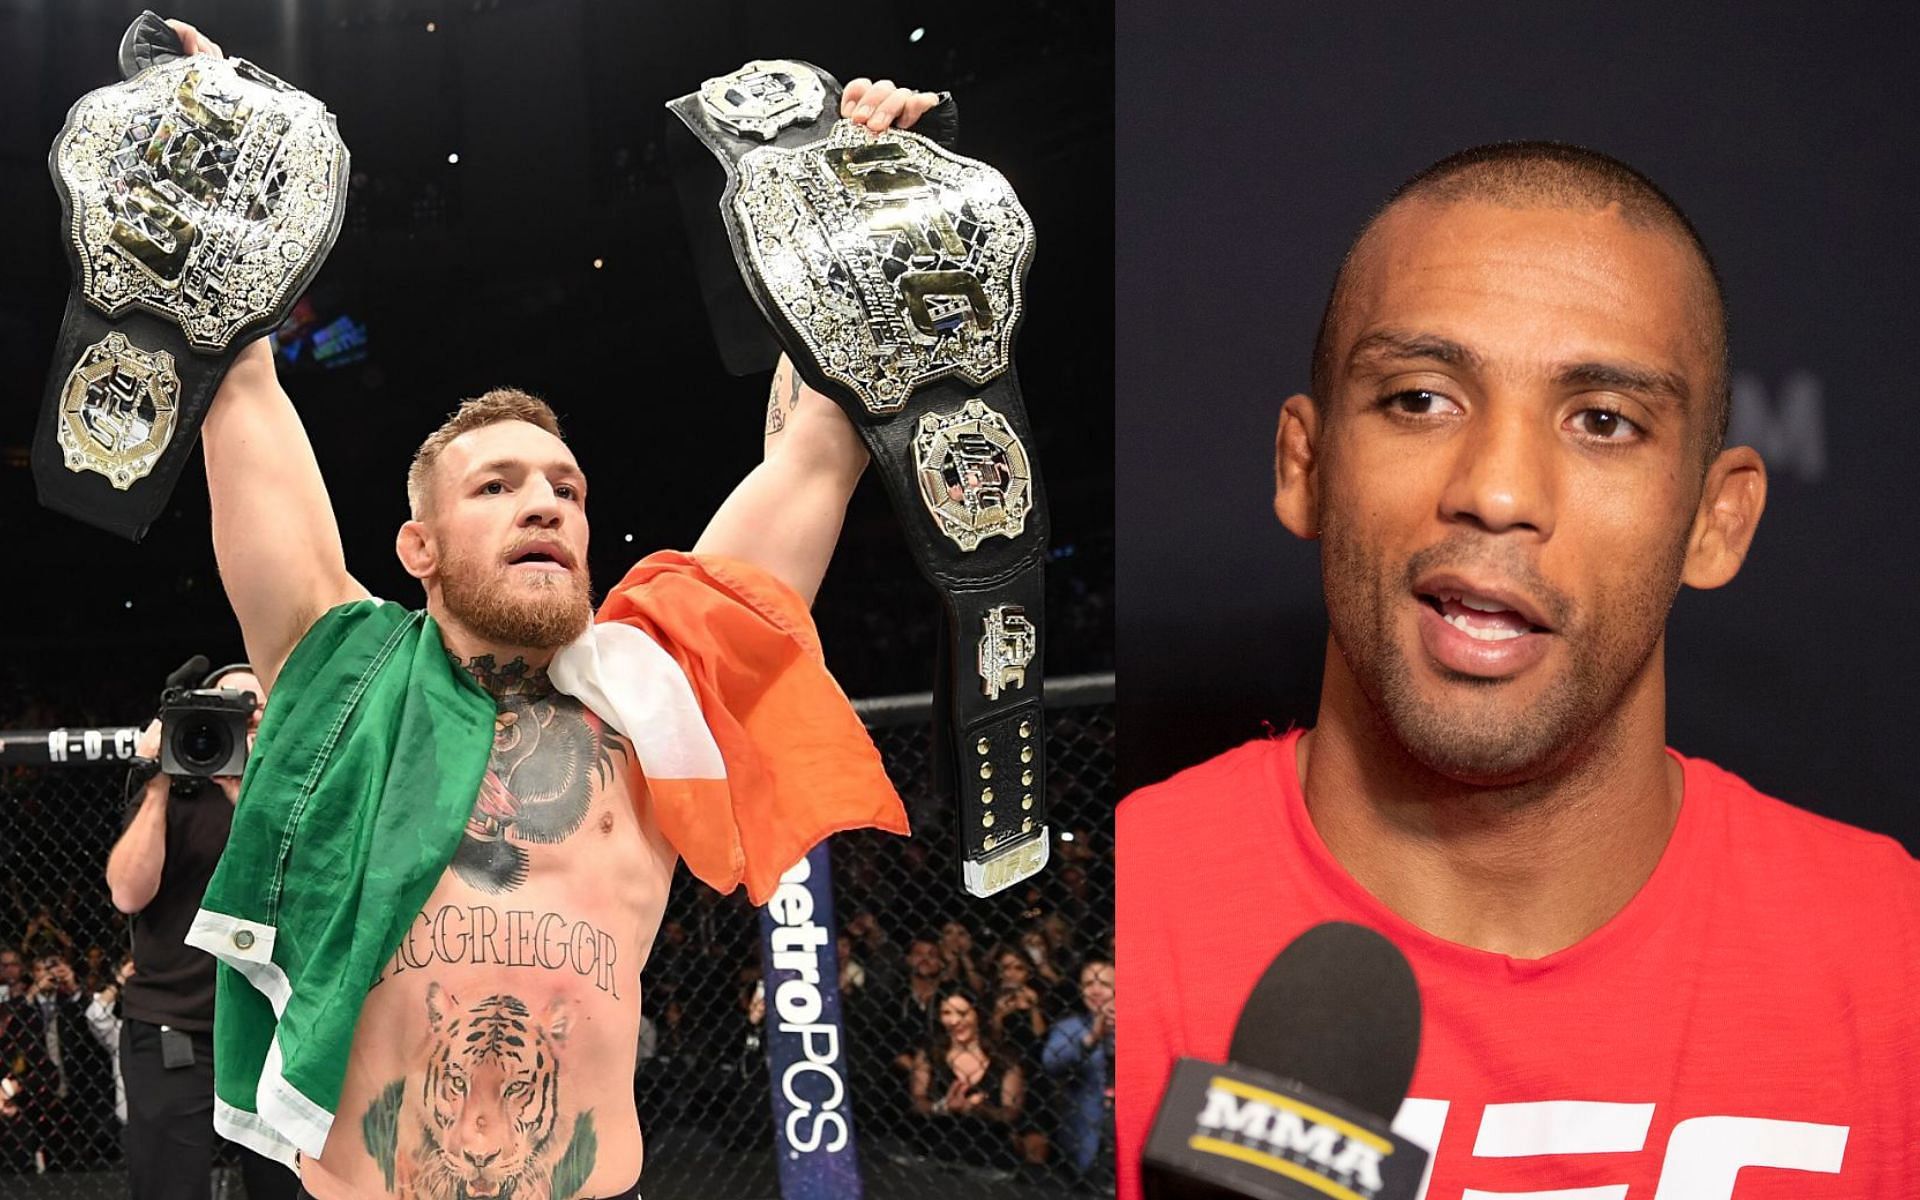 Conor McGregor (left) and Edson Barboza (right). [via Getty Images and YouTube]